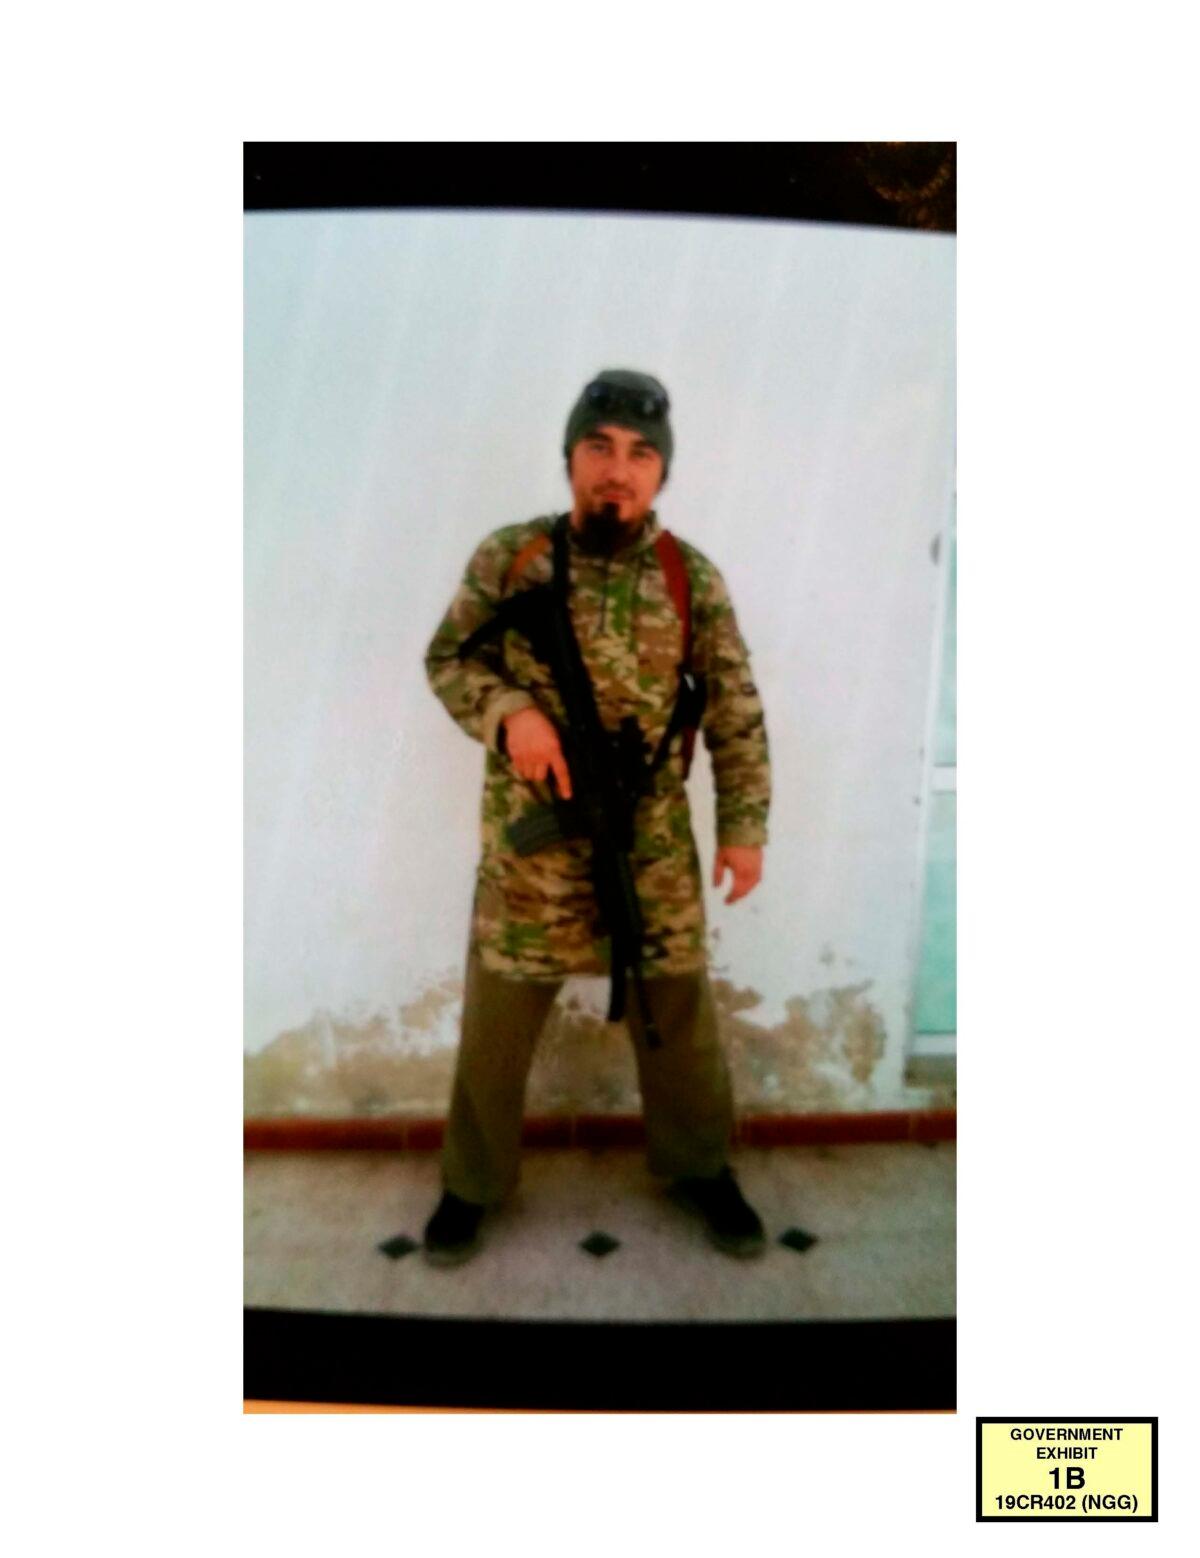 A man prosecutors say is Ruslan Maratovich Asainov in Tabqa, Syria, between June 2014 and April 2015. (U.S. Attorney's Office for the Eastern District of New York via AP)